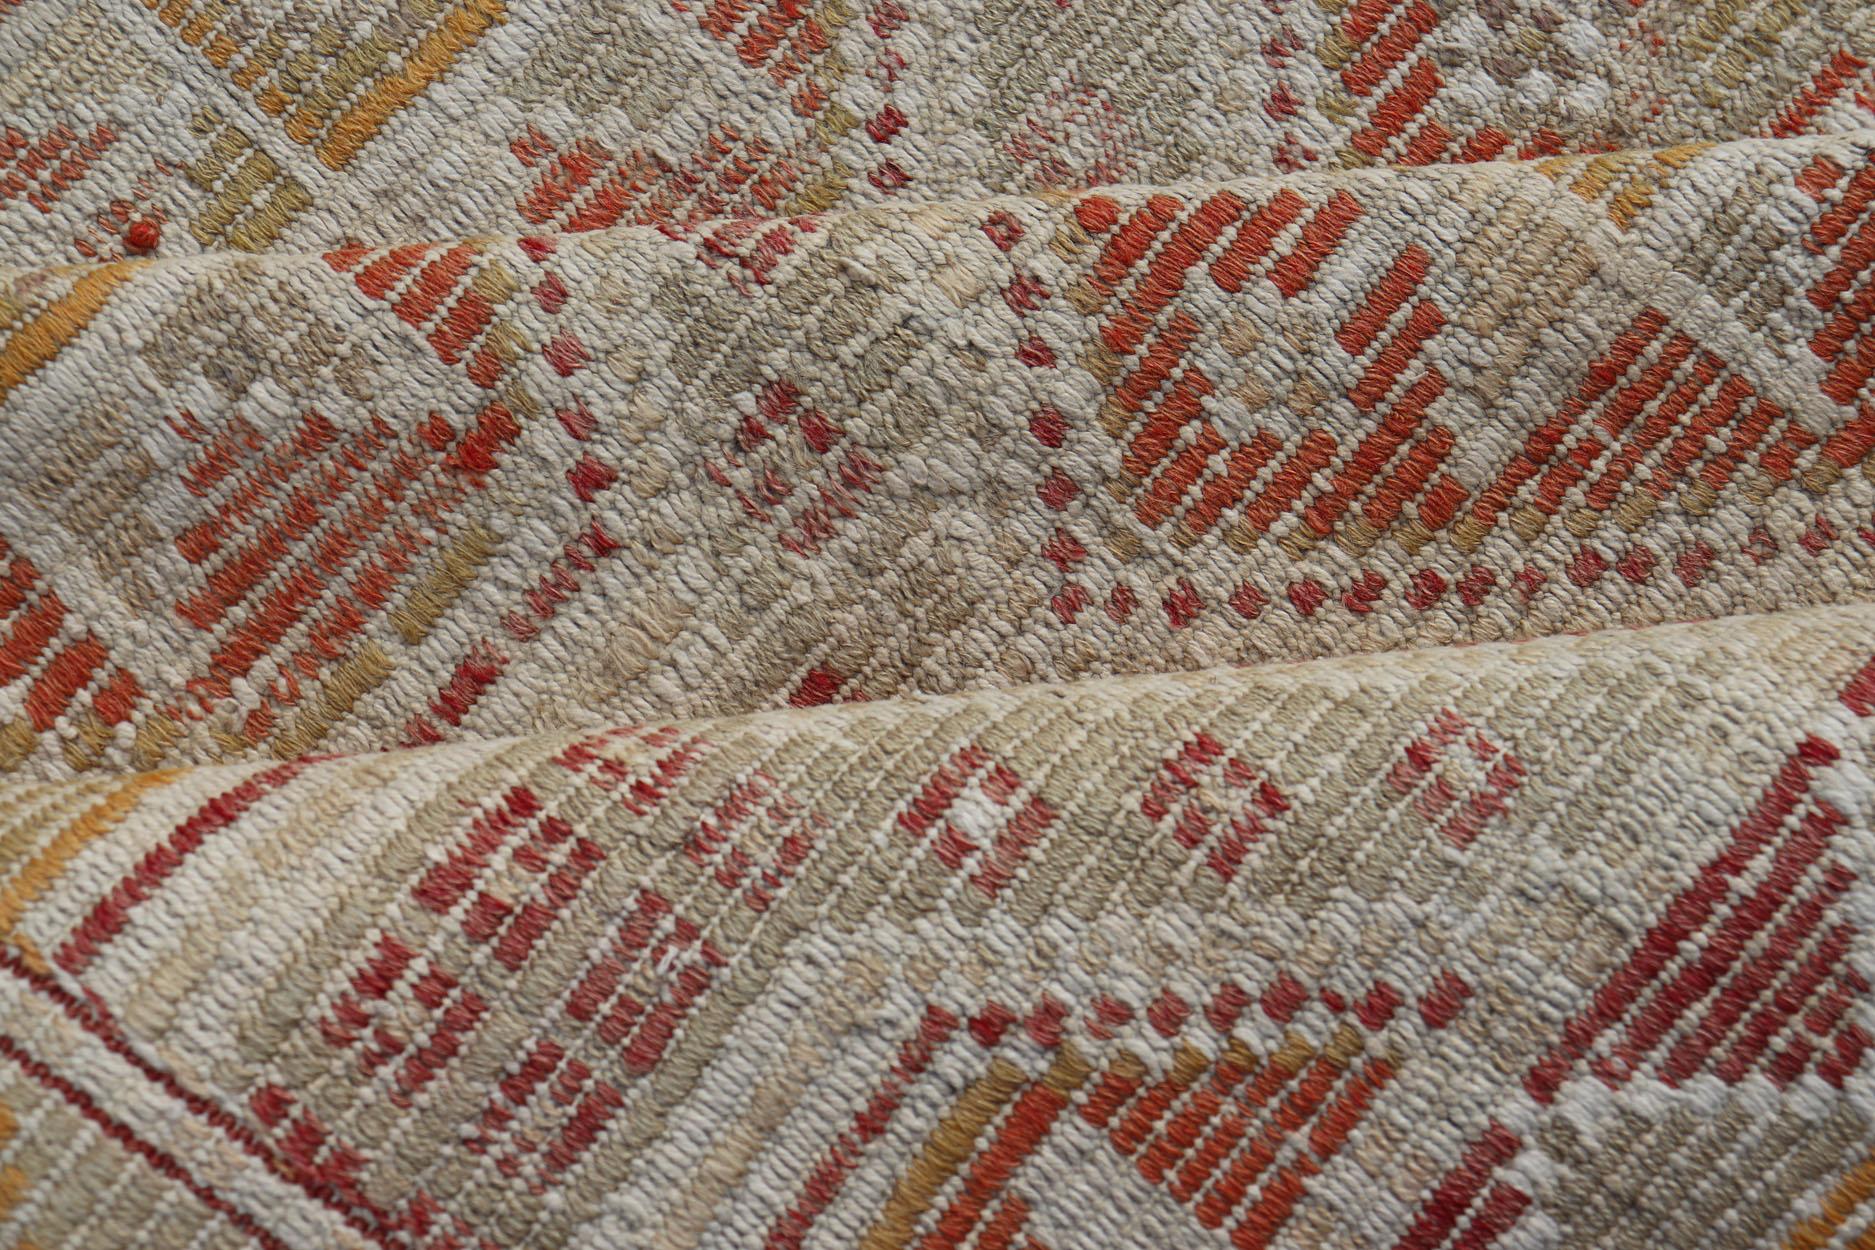 Turkish Vintage Kilim with All-Over Diamond Design With Orange & Yellow For Sale 2